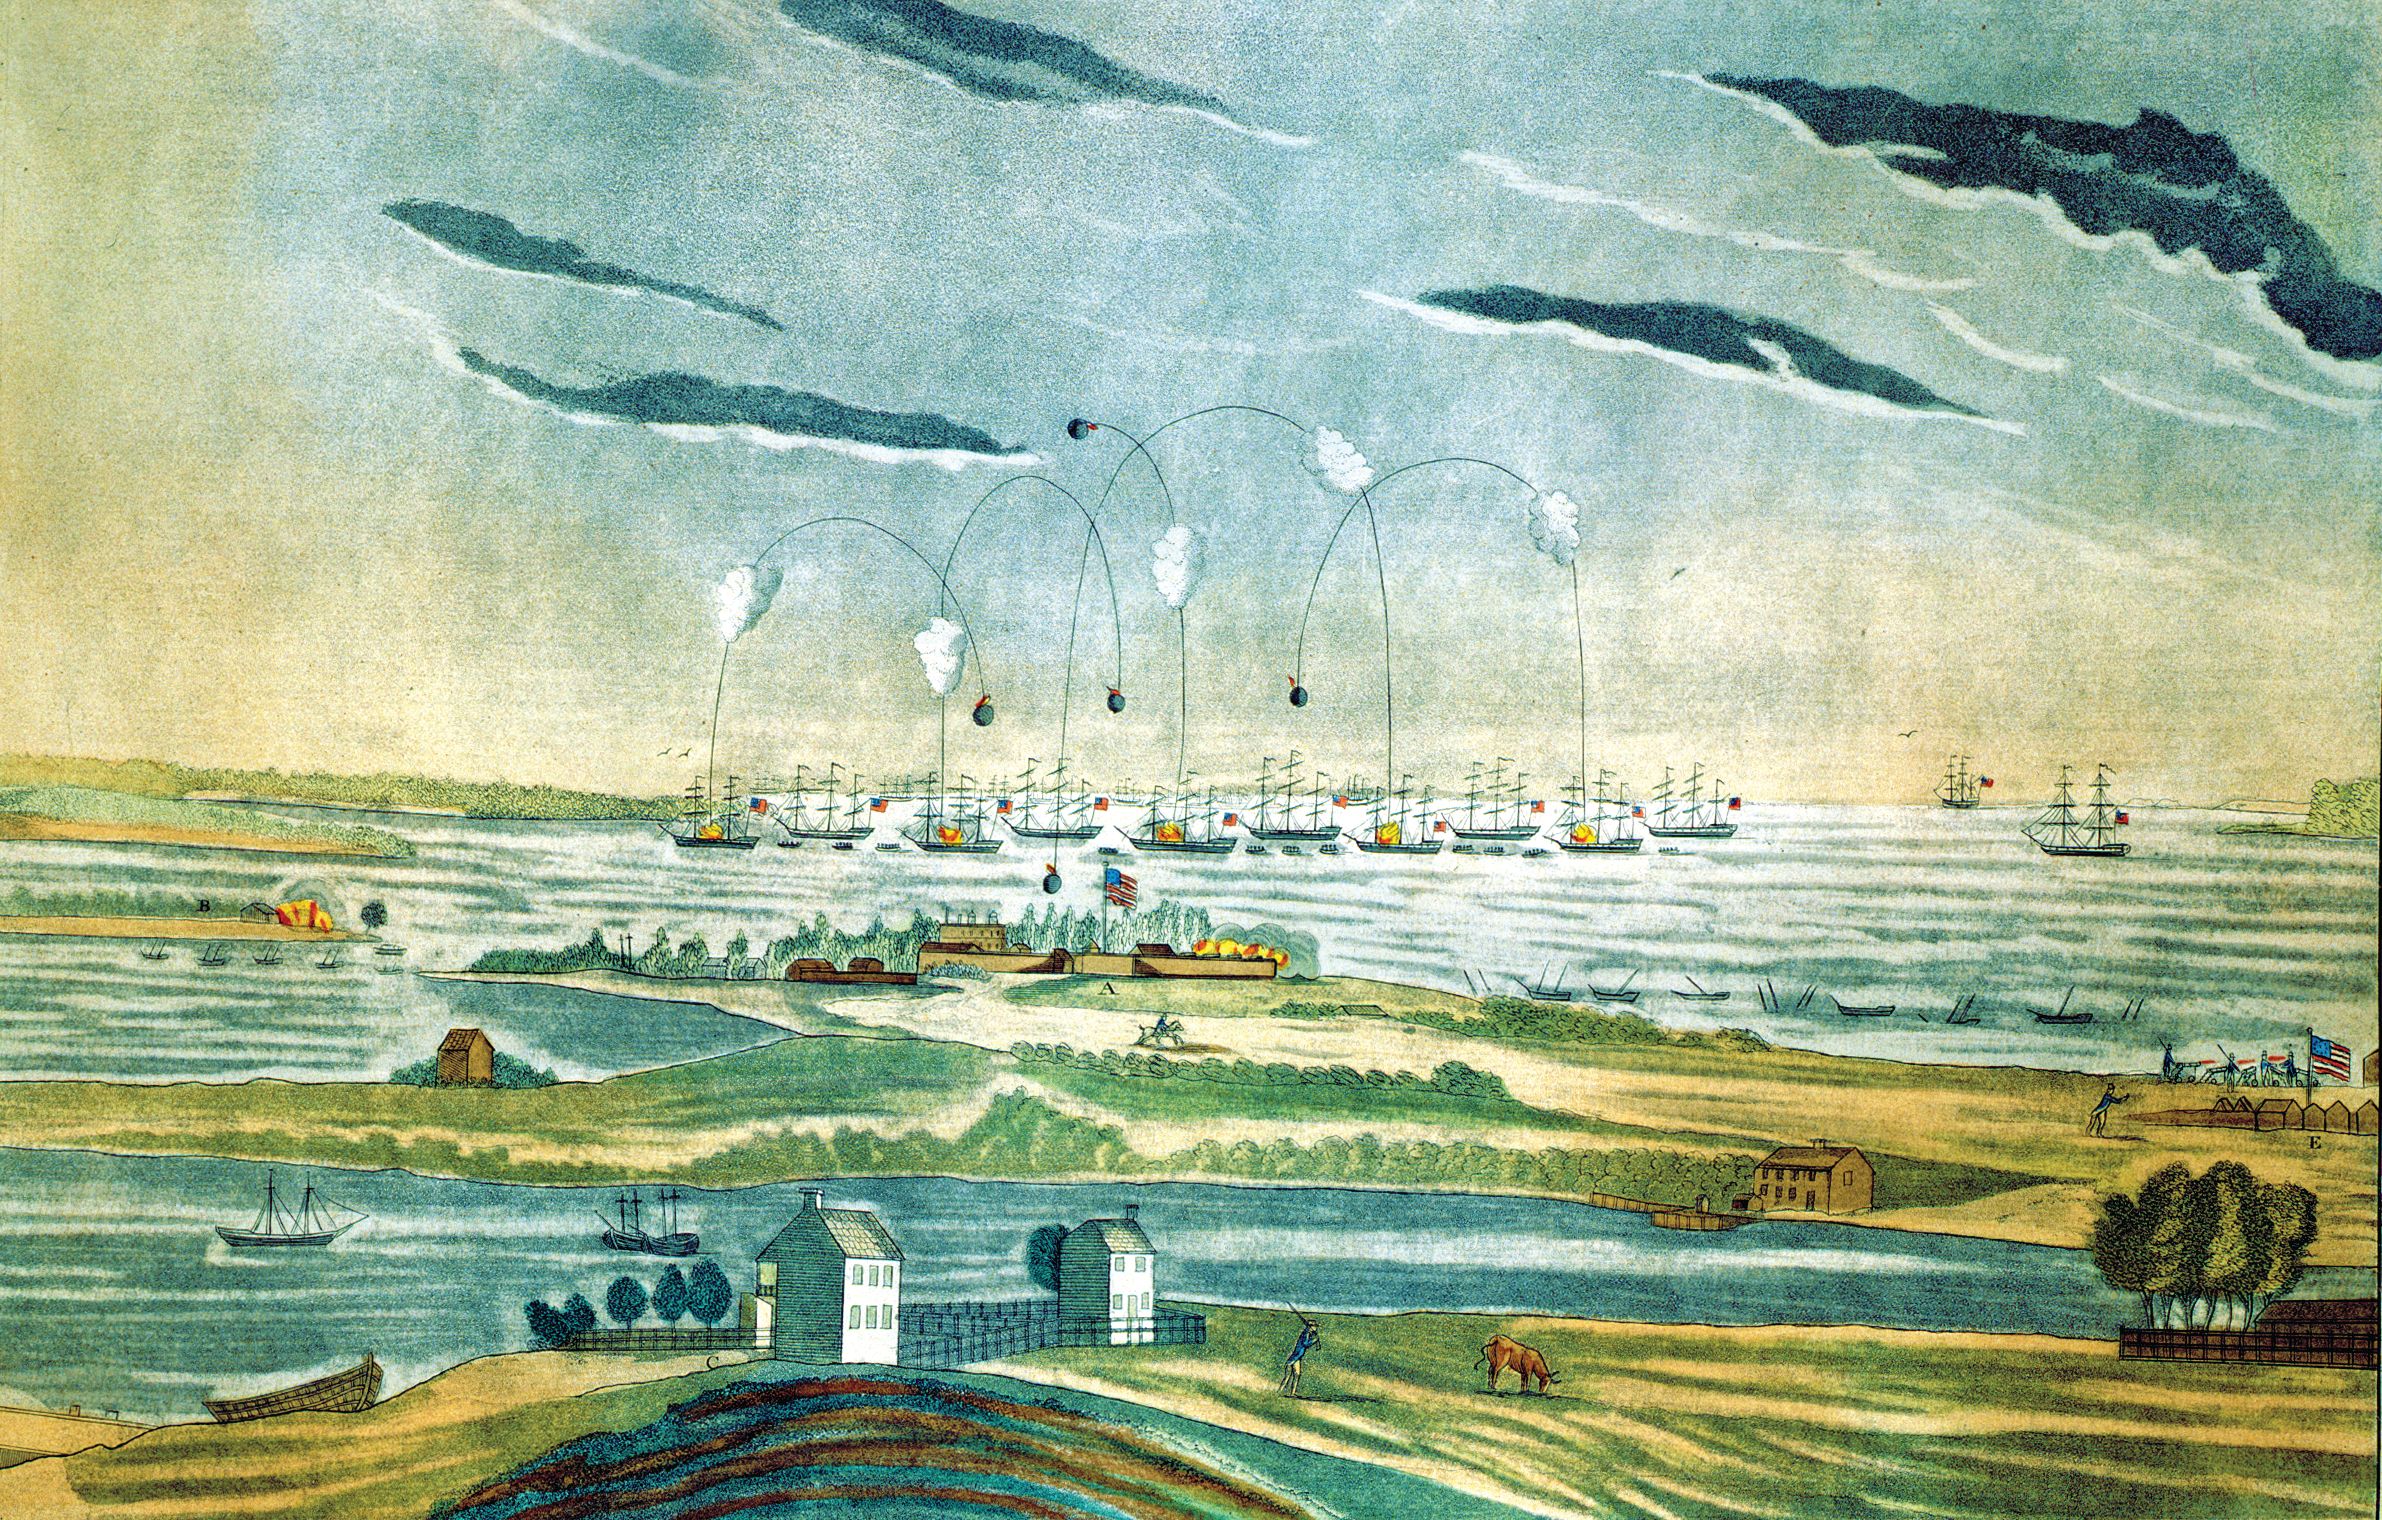 At Fort McHenry in Baltimore, Maryland, during the War of 1812, the British used exploding shells.